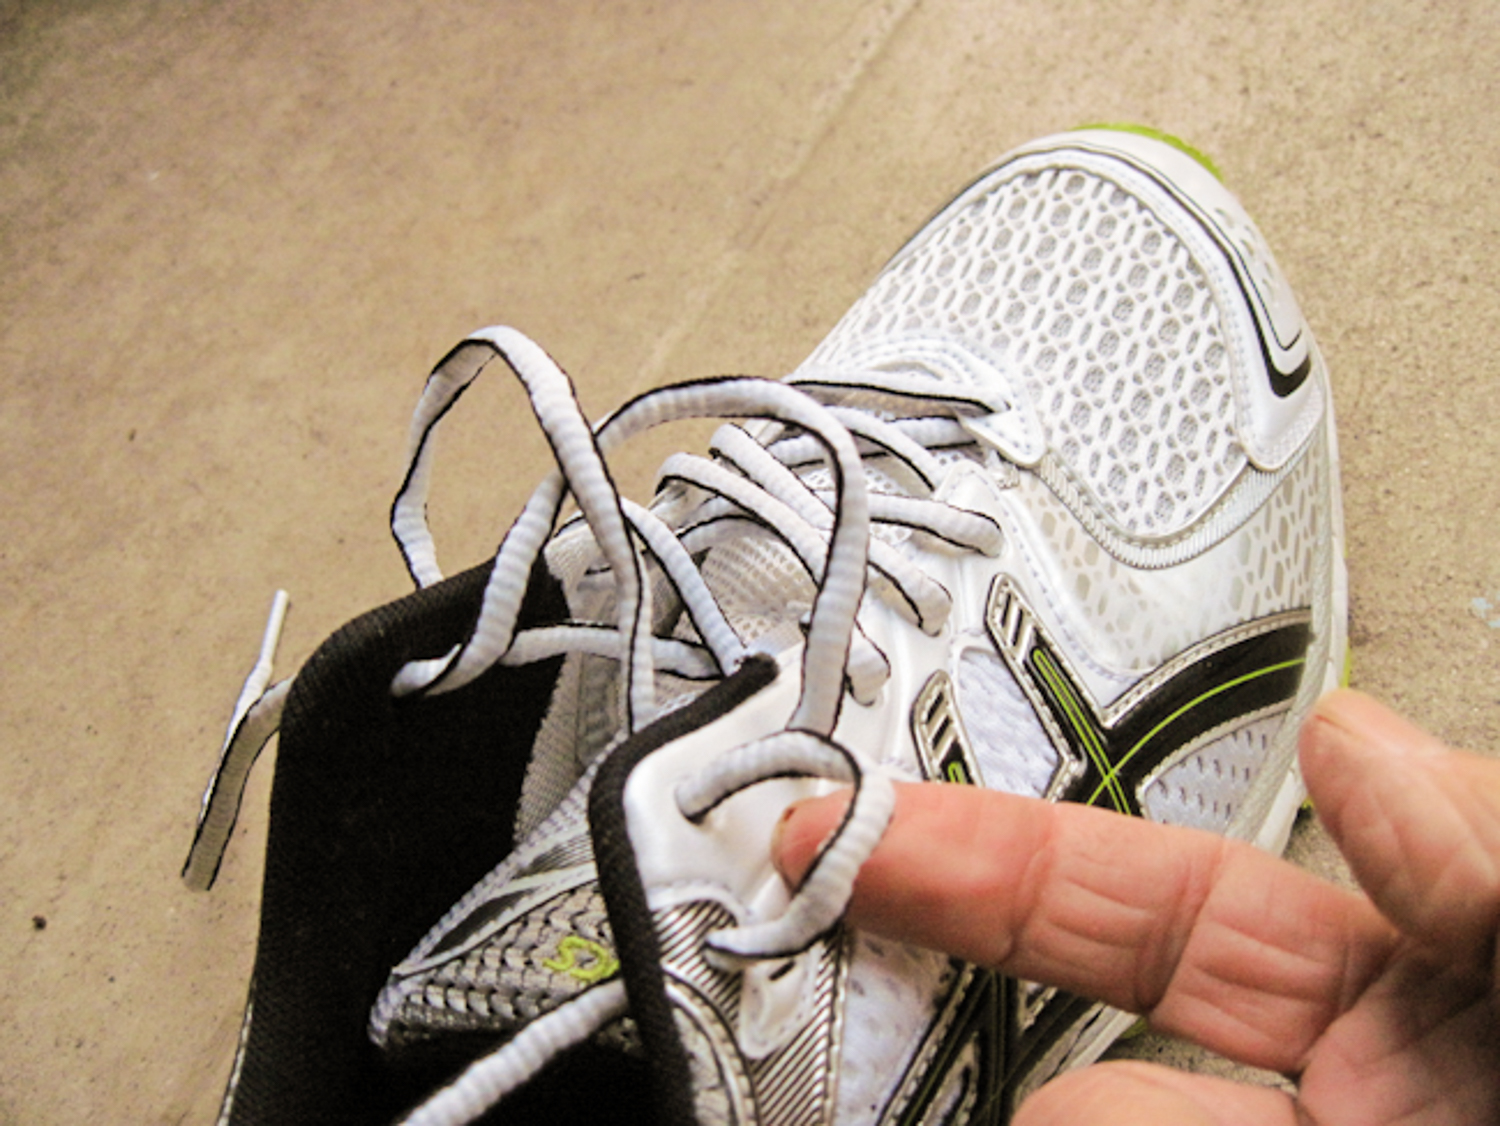 How to tie Running shoes – How to Run a Marathon